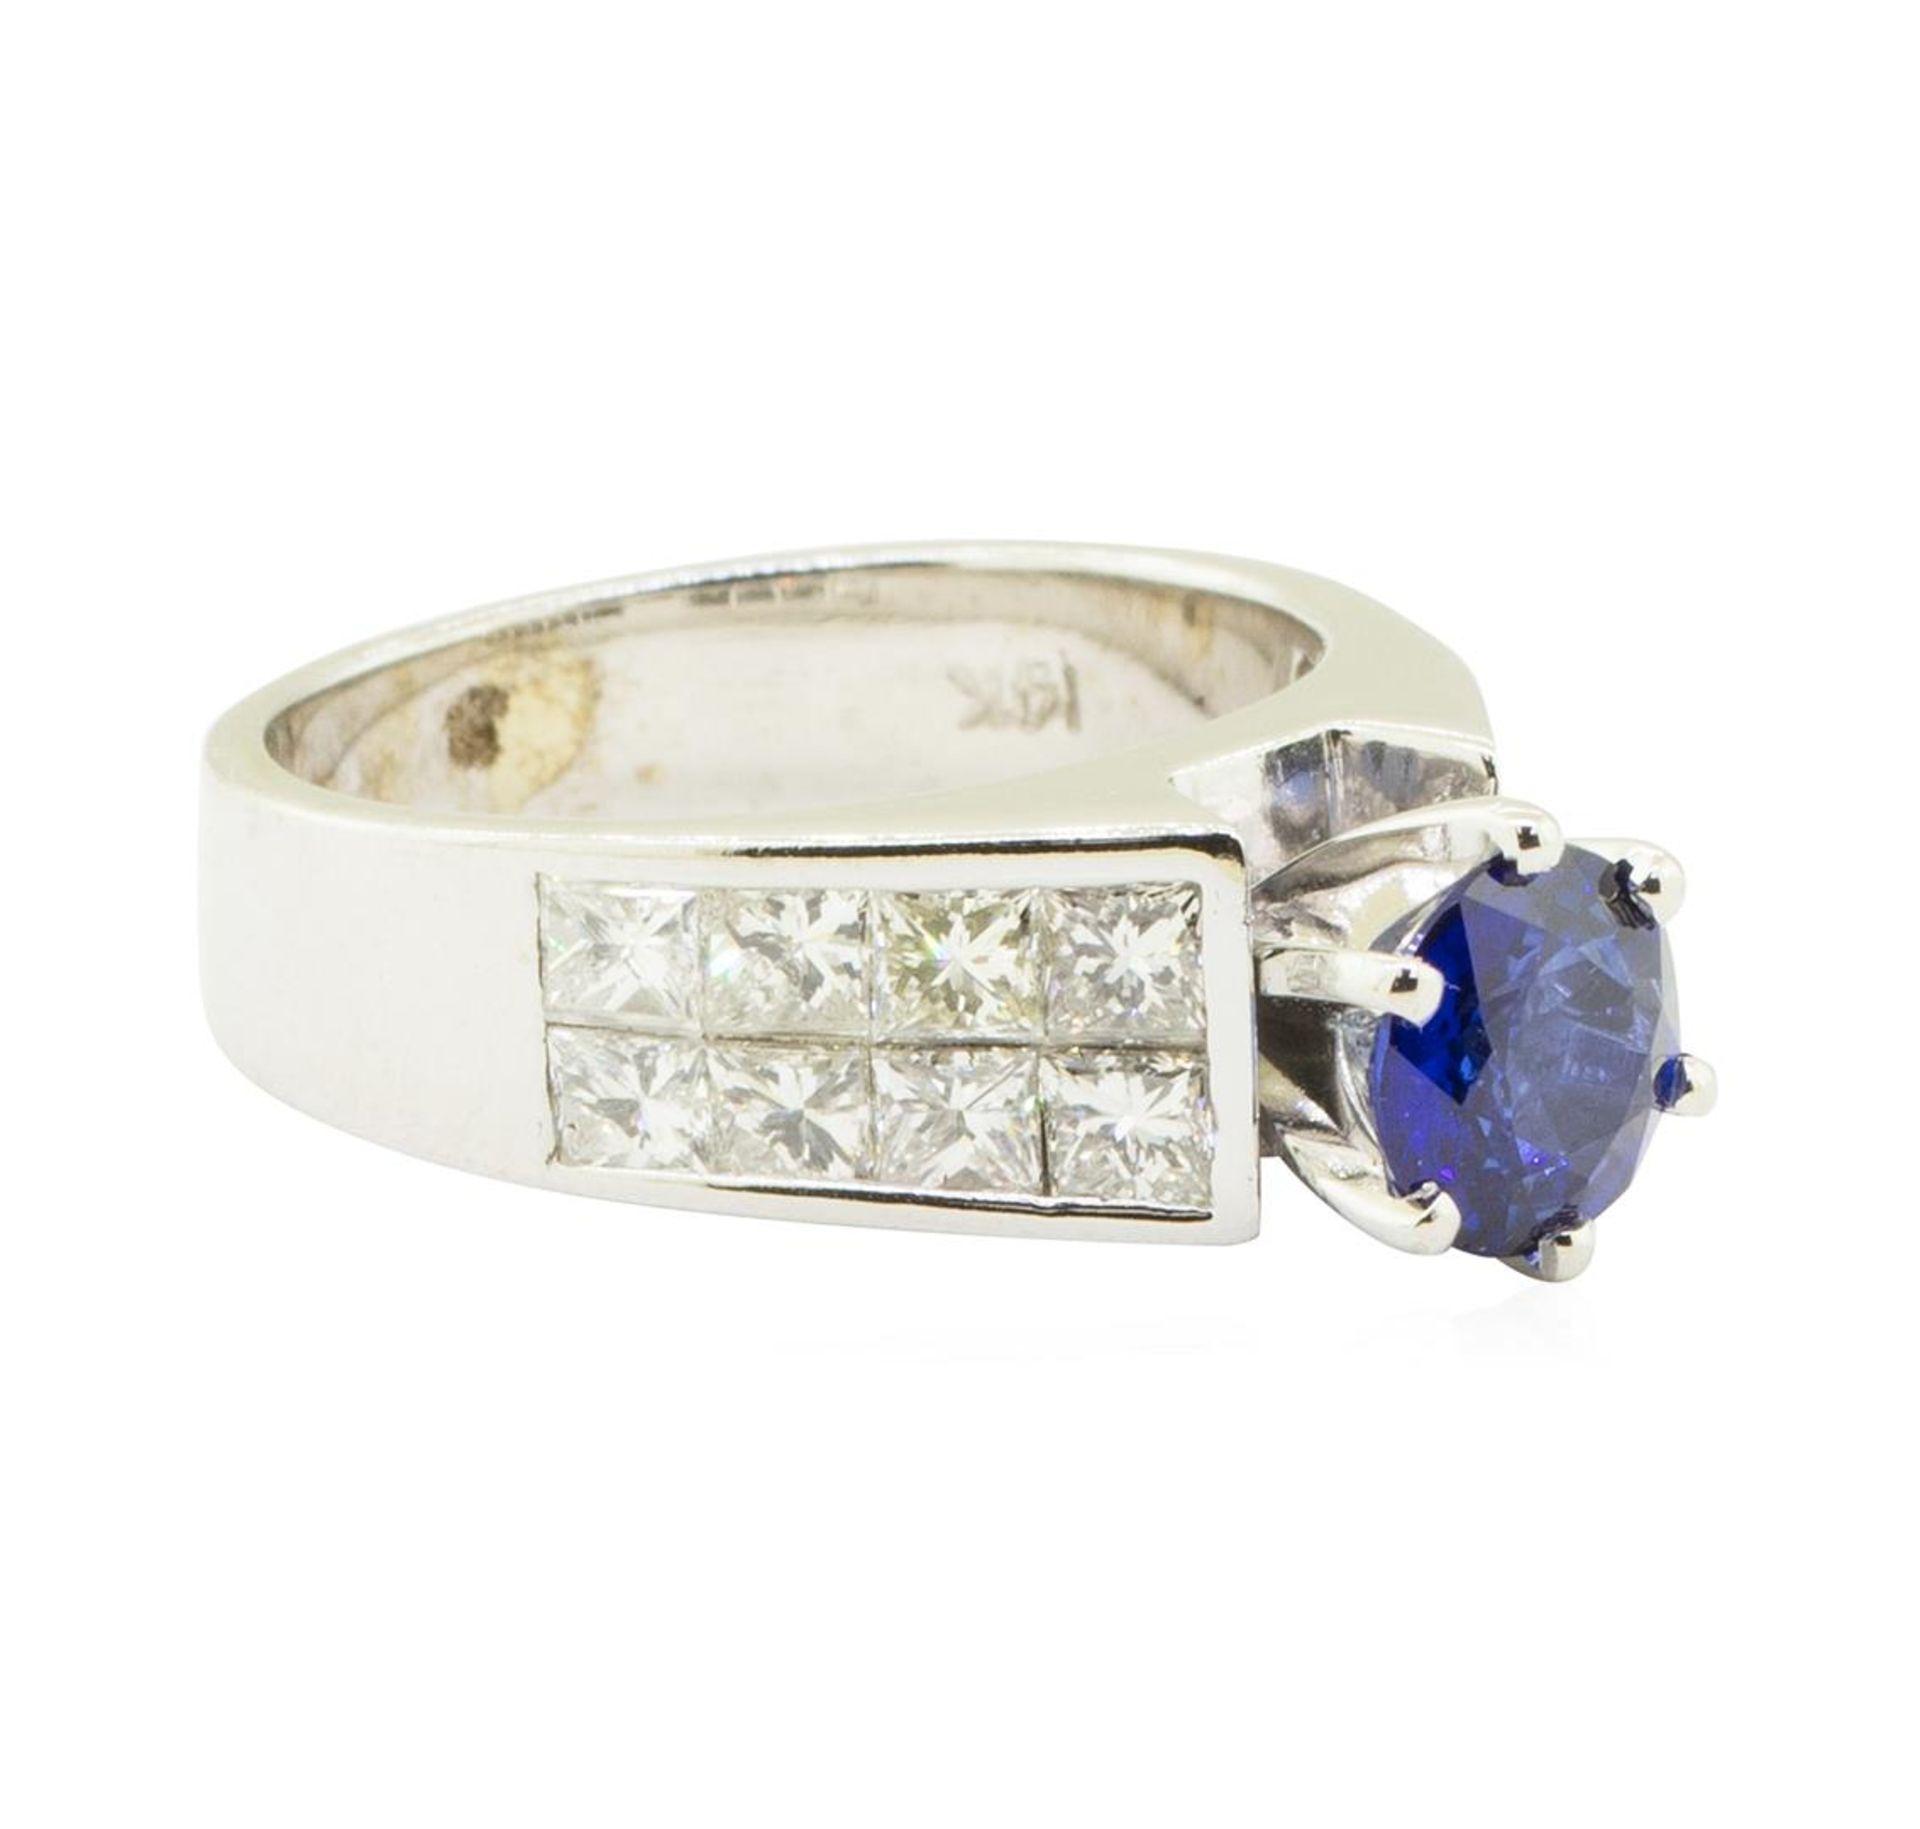 3.15 ctw Round Brilliant Blue Sapphire And Diamond Ring - 14KT White Gold